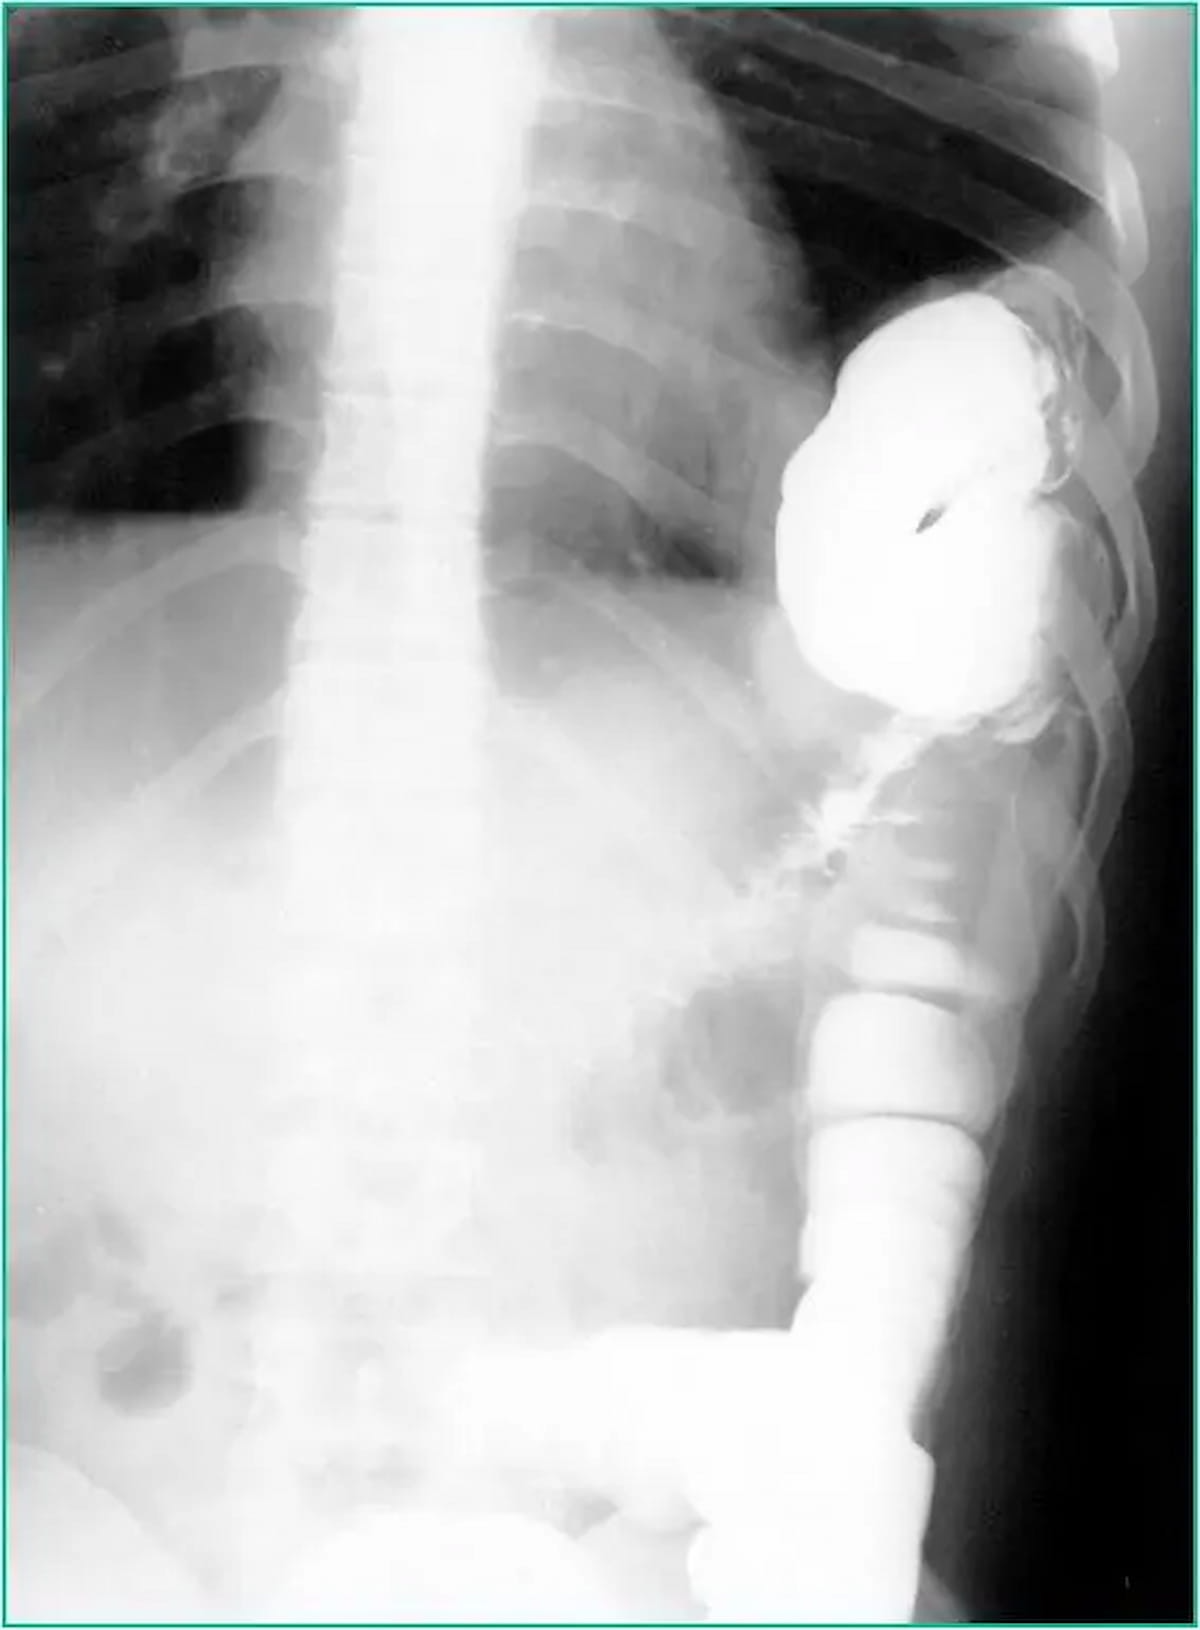 Image IQ Quiz: Patient with Abdominal Pain, Chest Pain and Difficulty Breathing